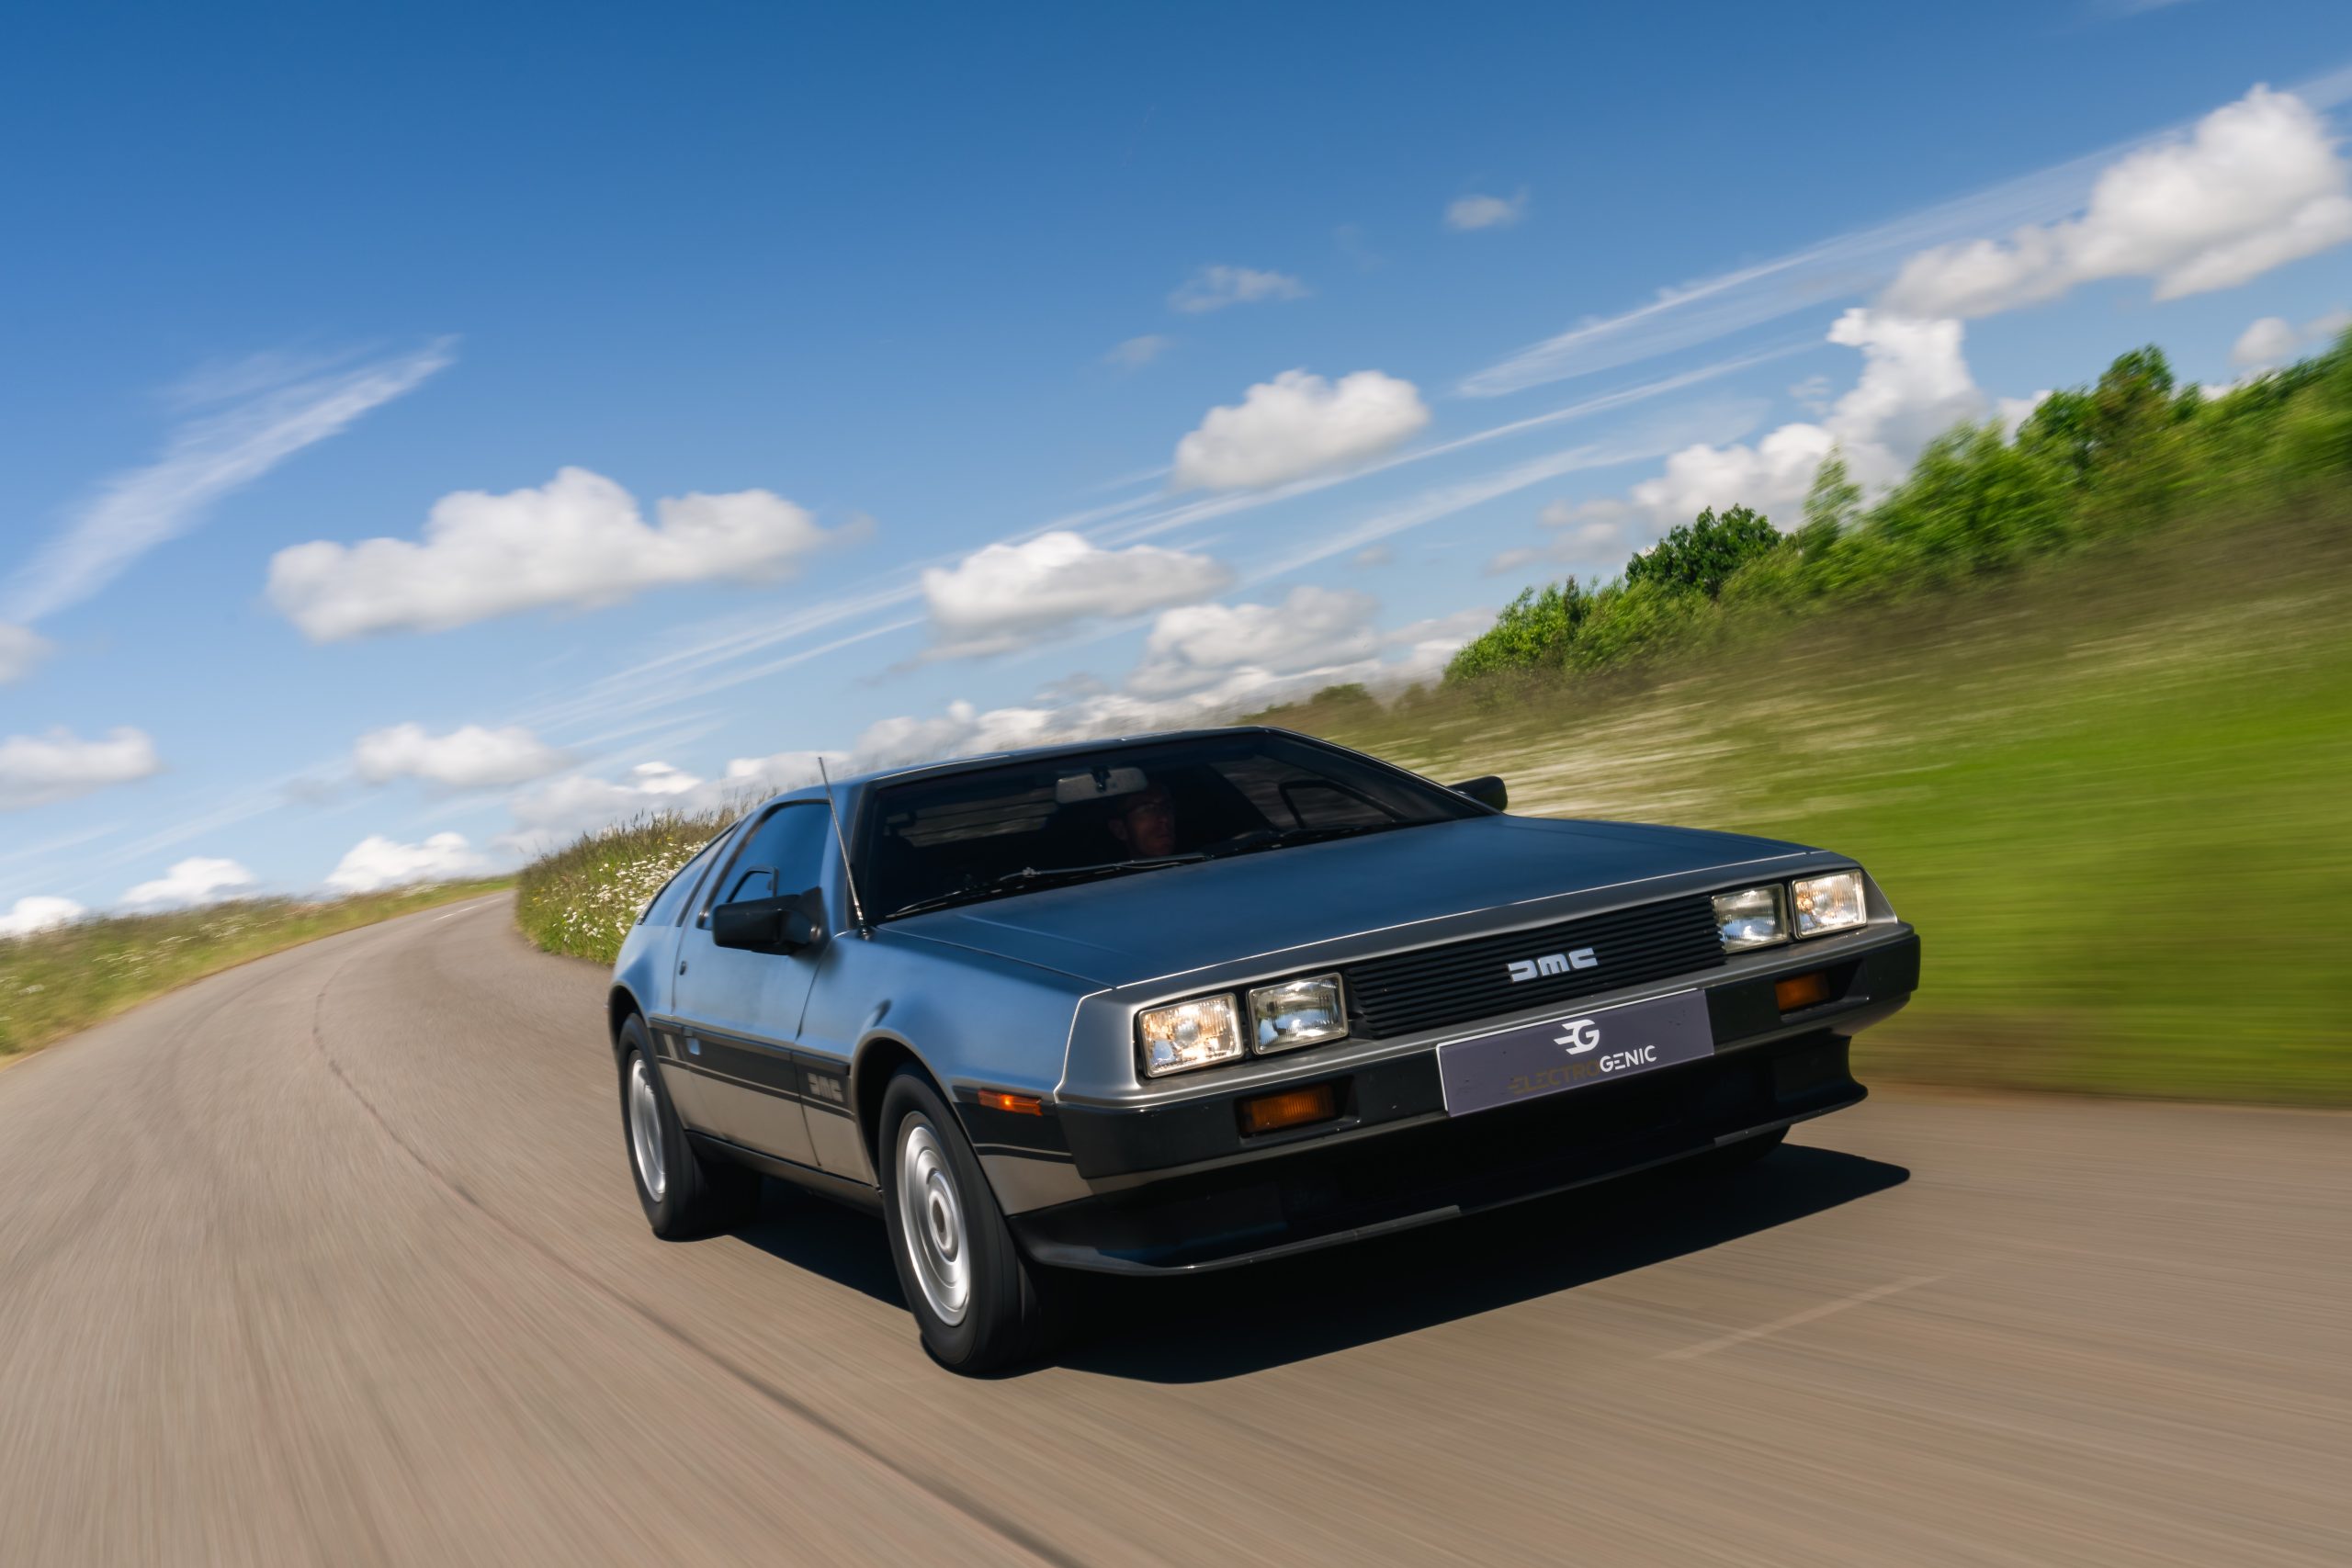 Driving the Electrogenic DeLorean DMC-12: This Sucker’s Electrical